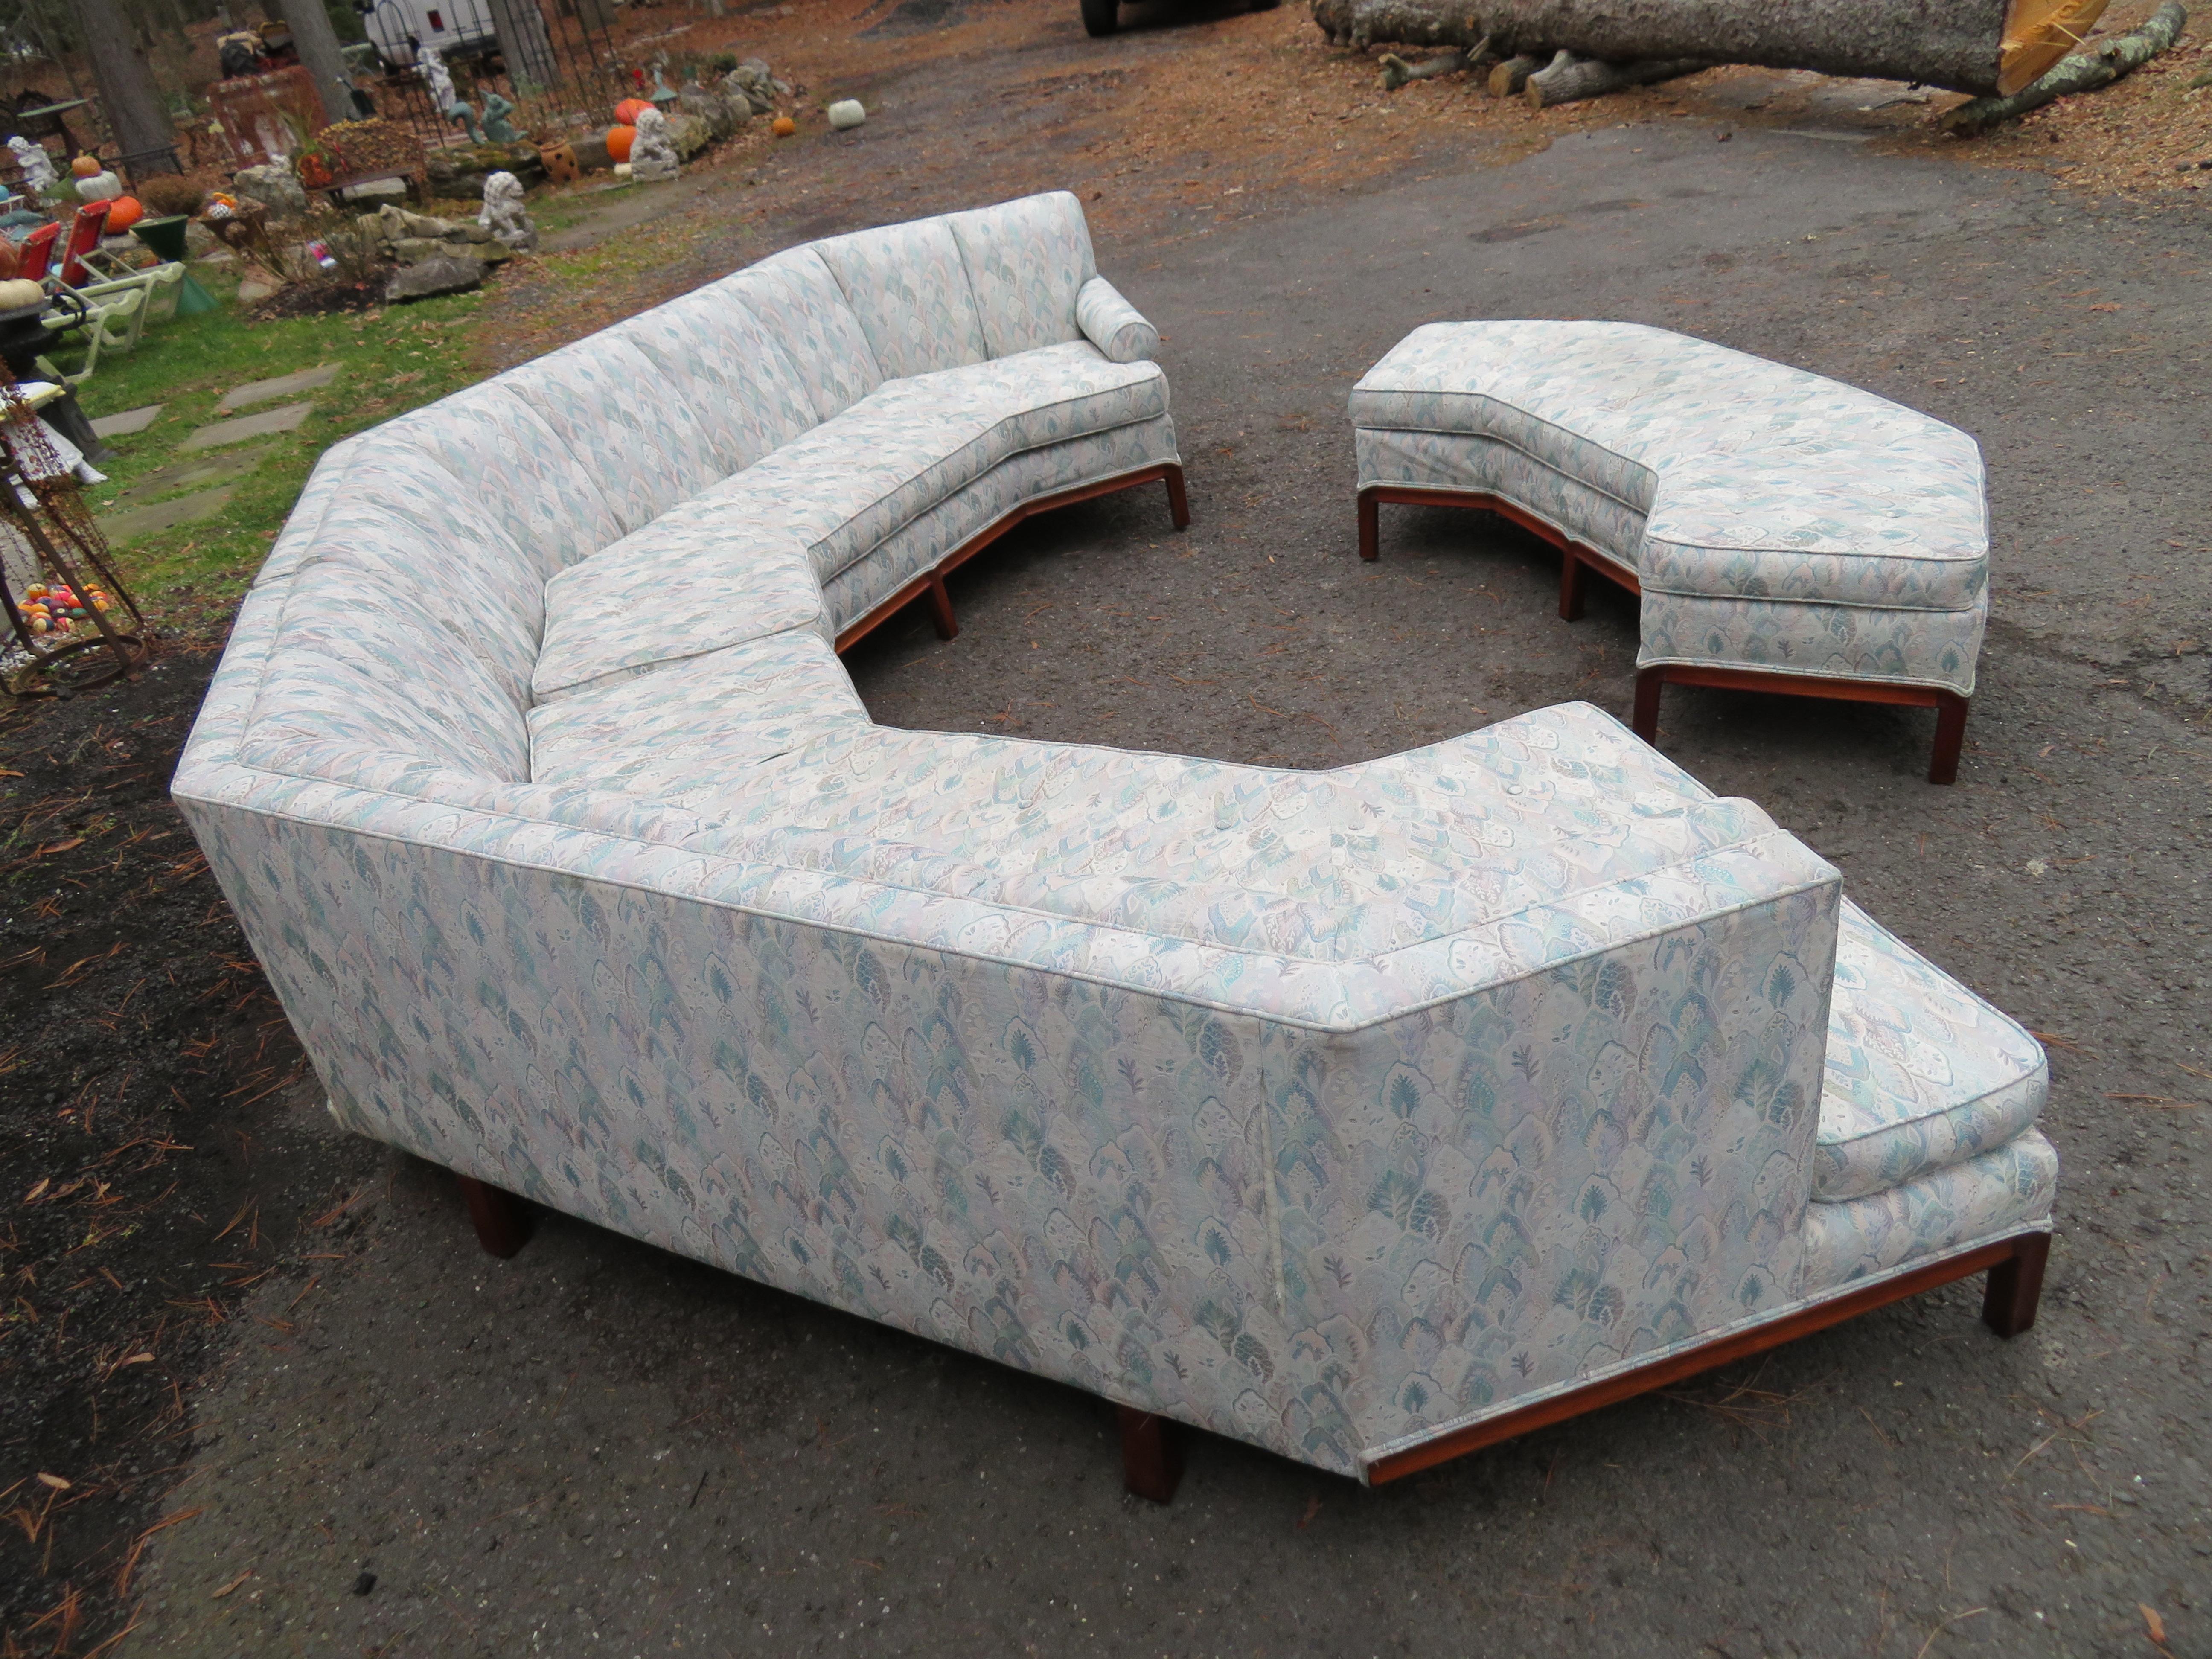 Magnificent 2 piece sectional sofa plus matching bench in the style of Harvey Probber. This wonderful sectional consists of the 2 pieces that make up the sofa and a matching bench. We love the shape of this sectional along with the well crafted